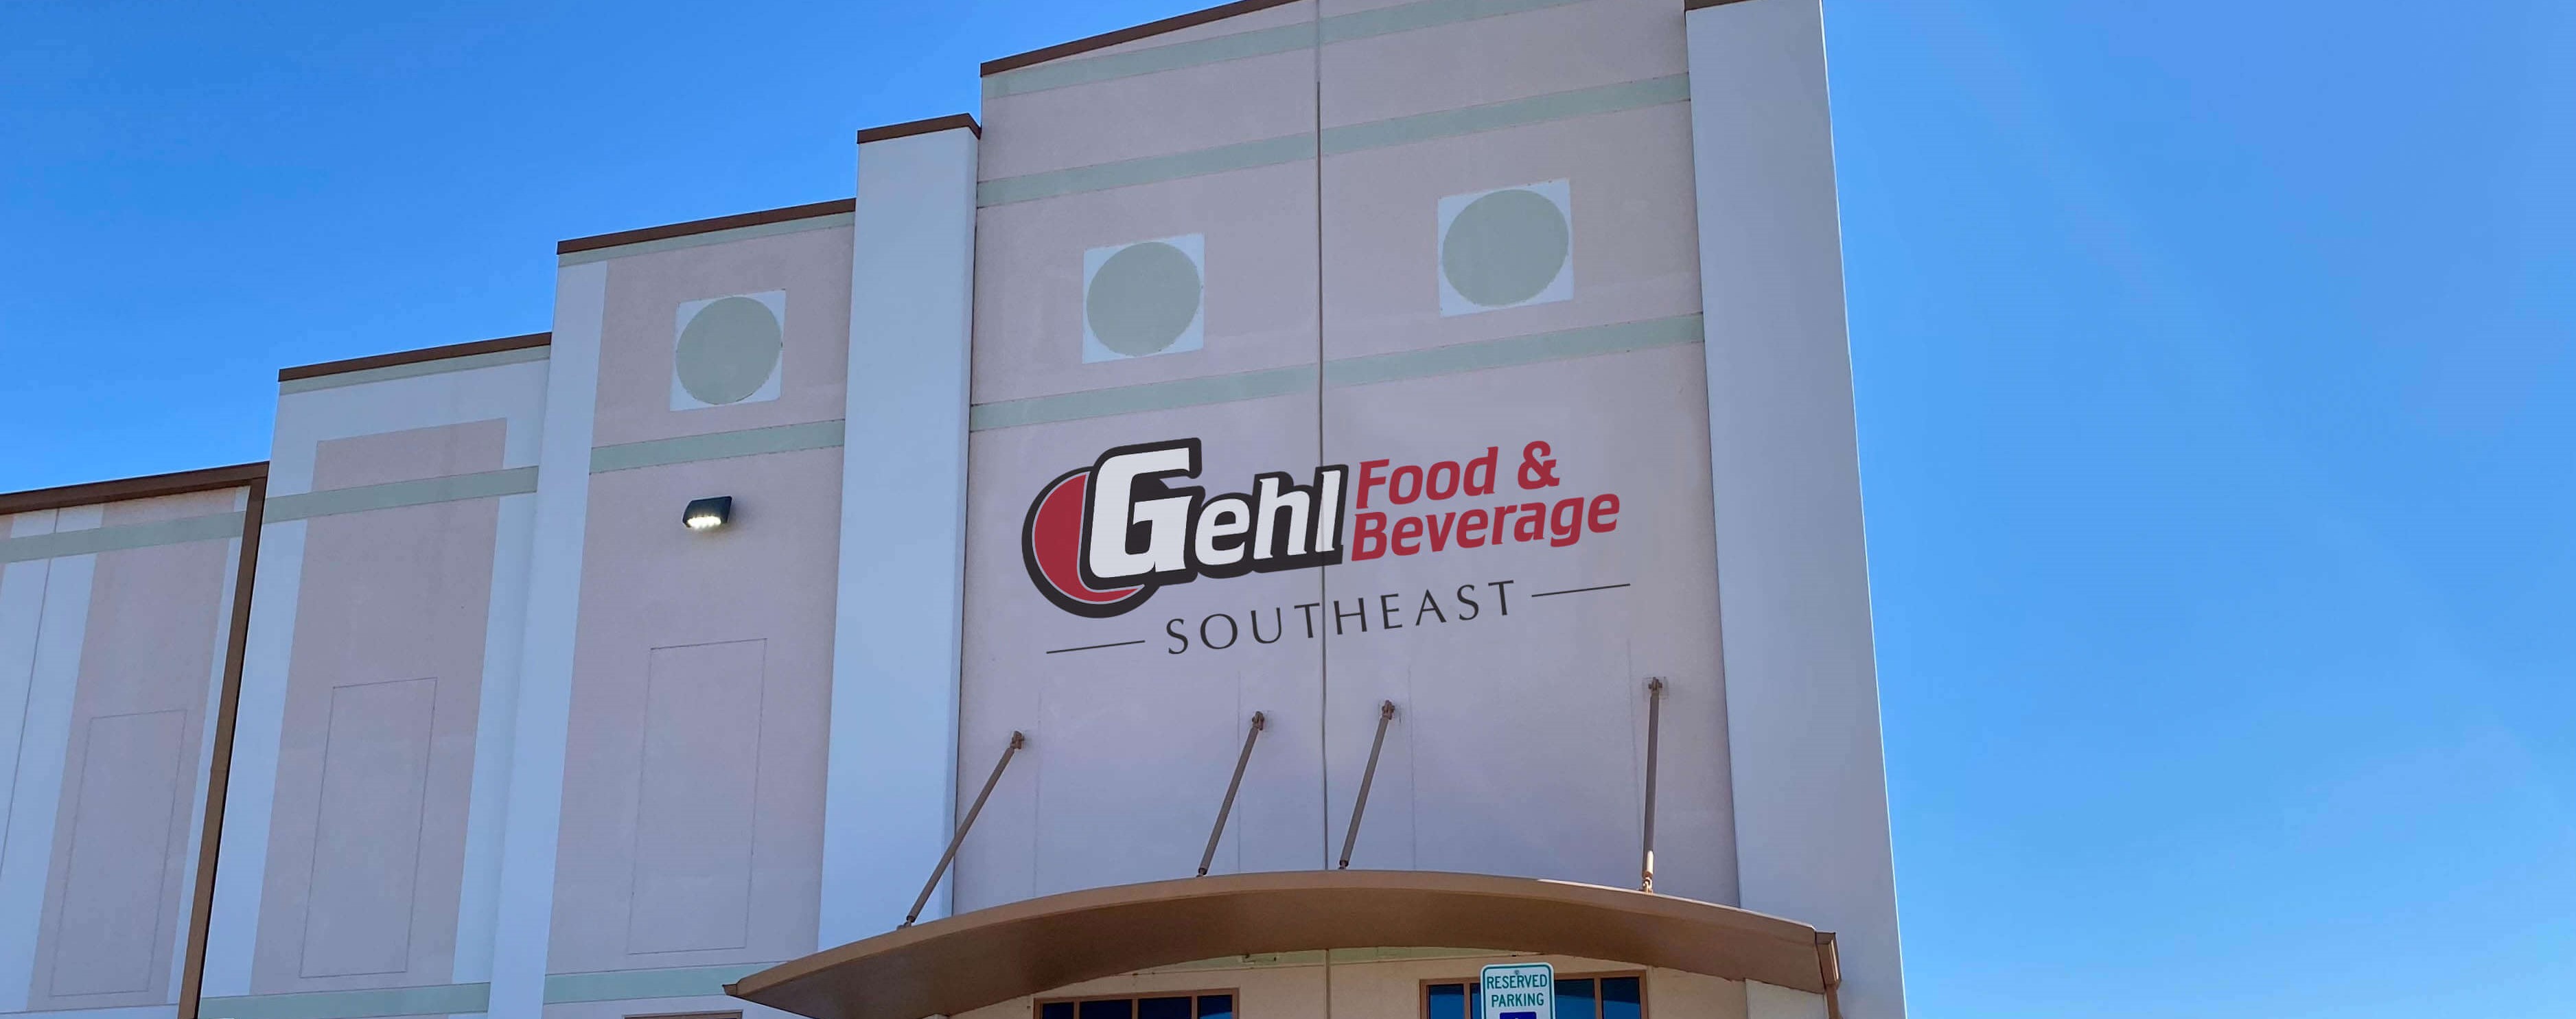 Large White Industry Building with Gehl Food & Beverage Southeast Logo on front.